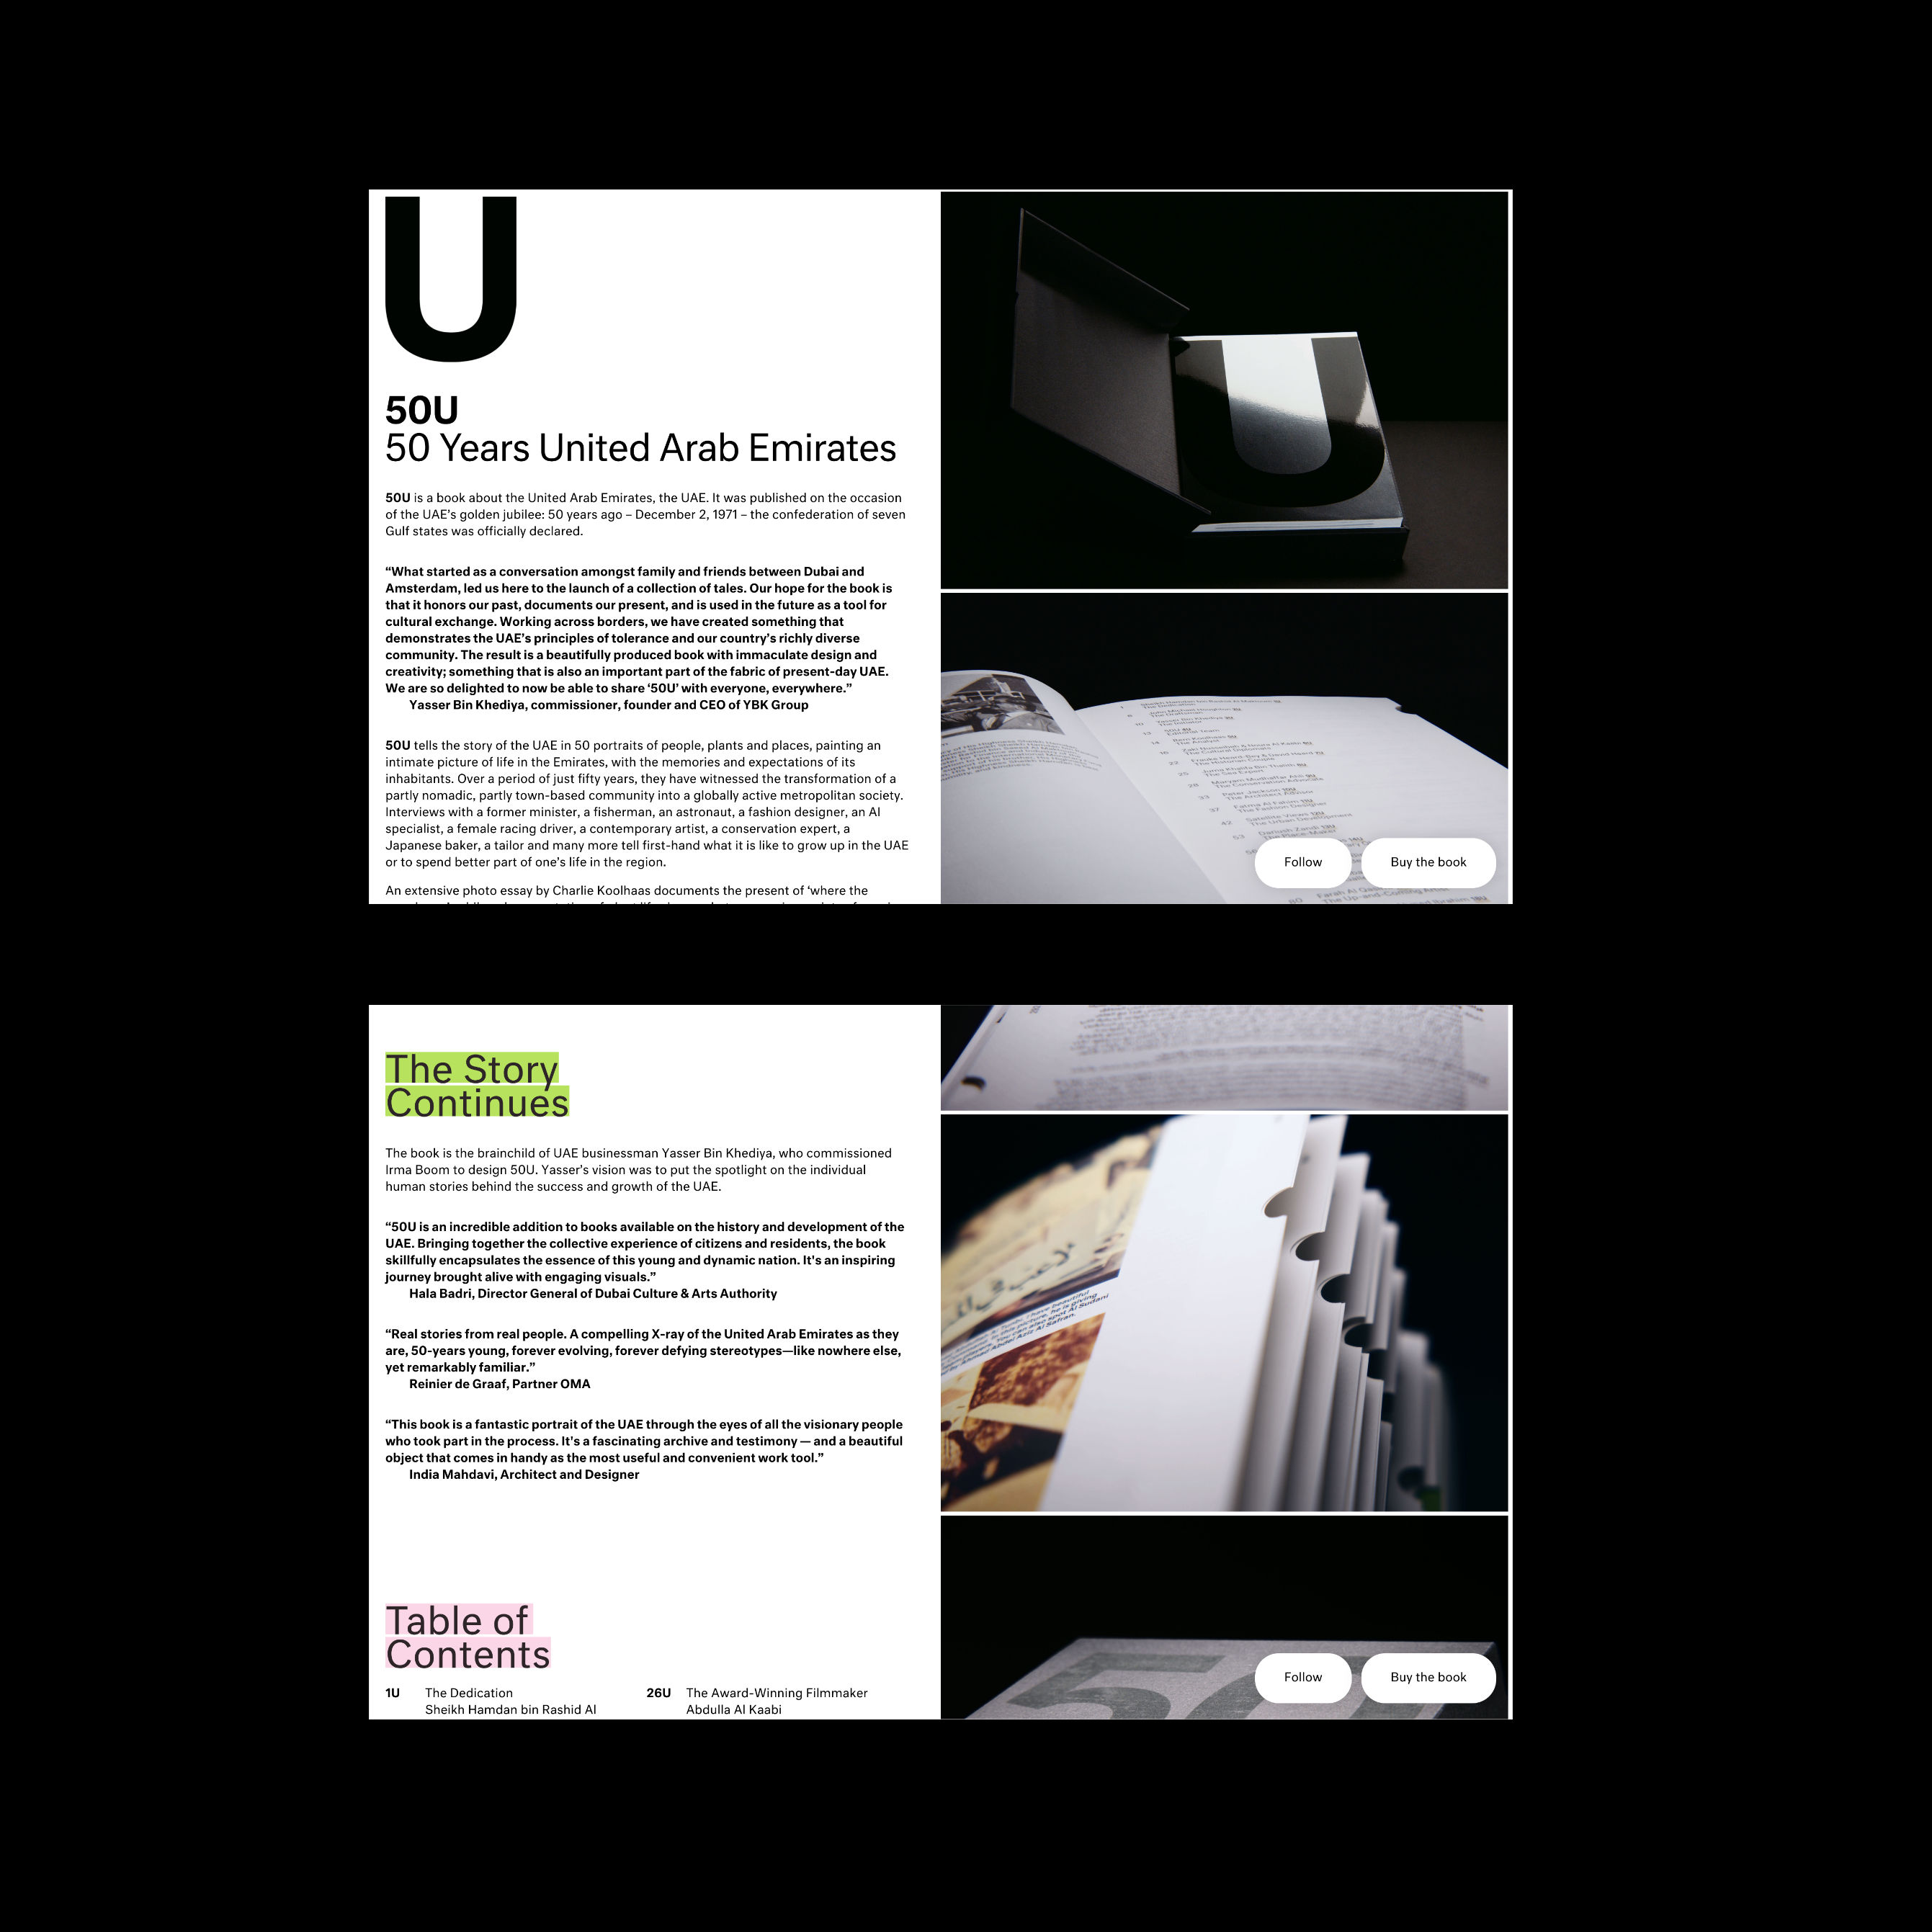 View of 50U website, designed and developed by Lena Robin